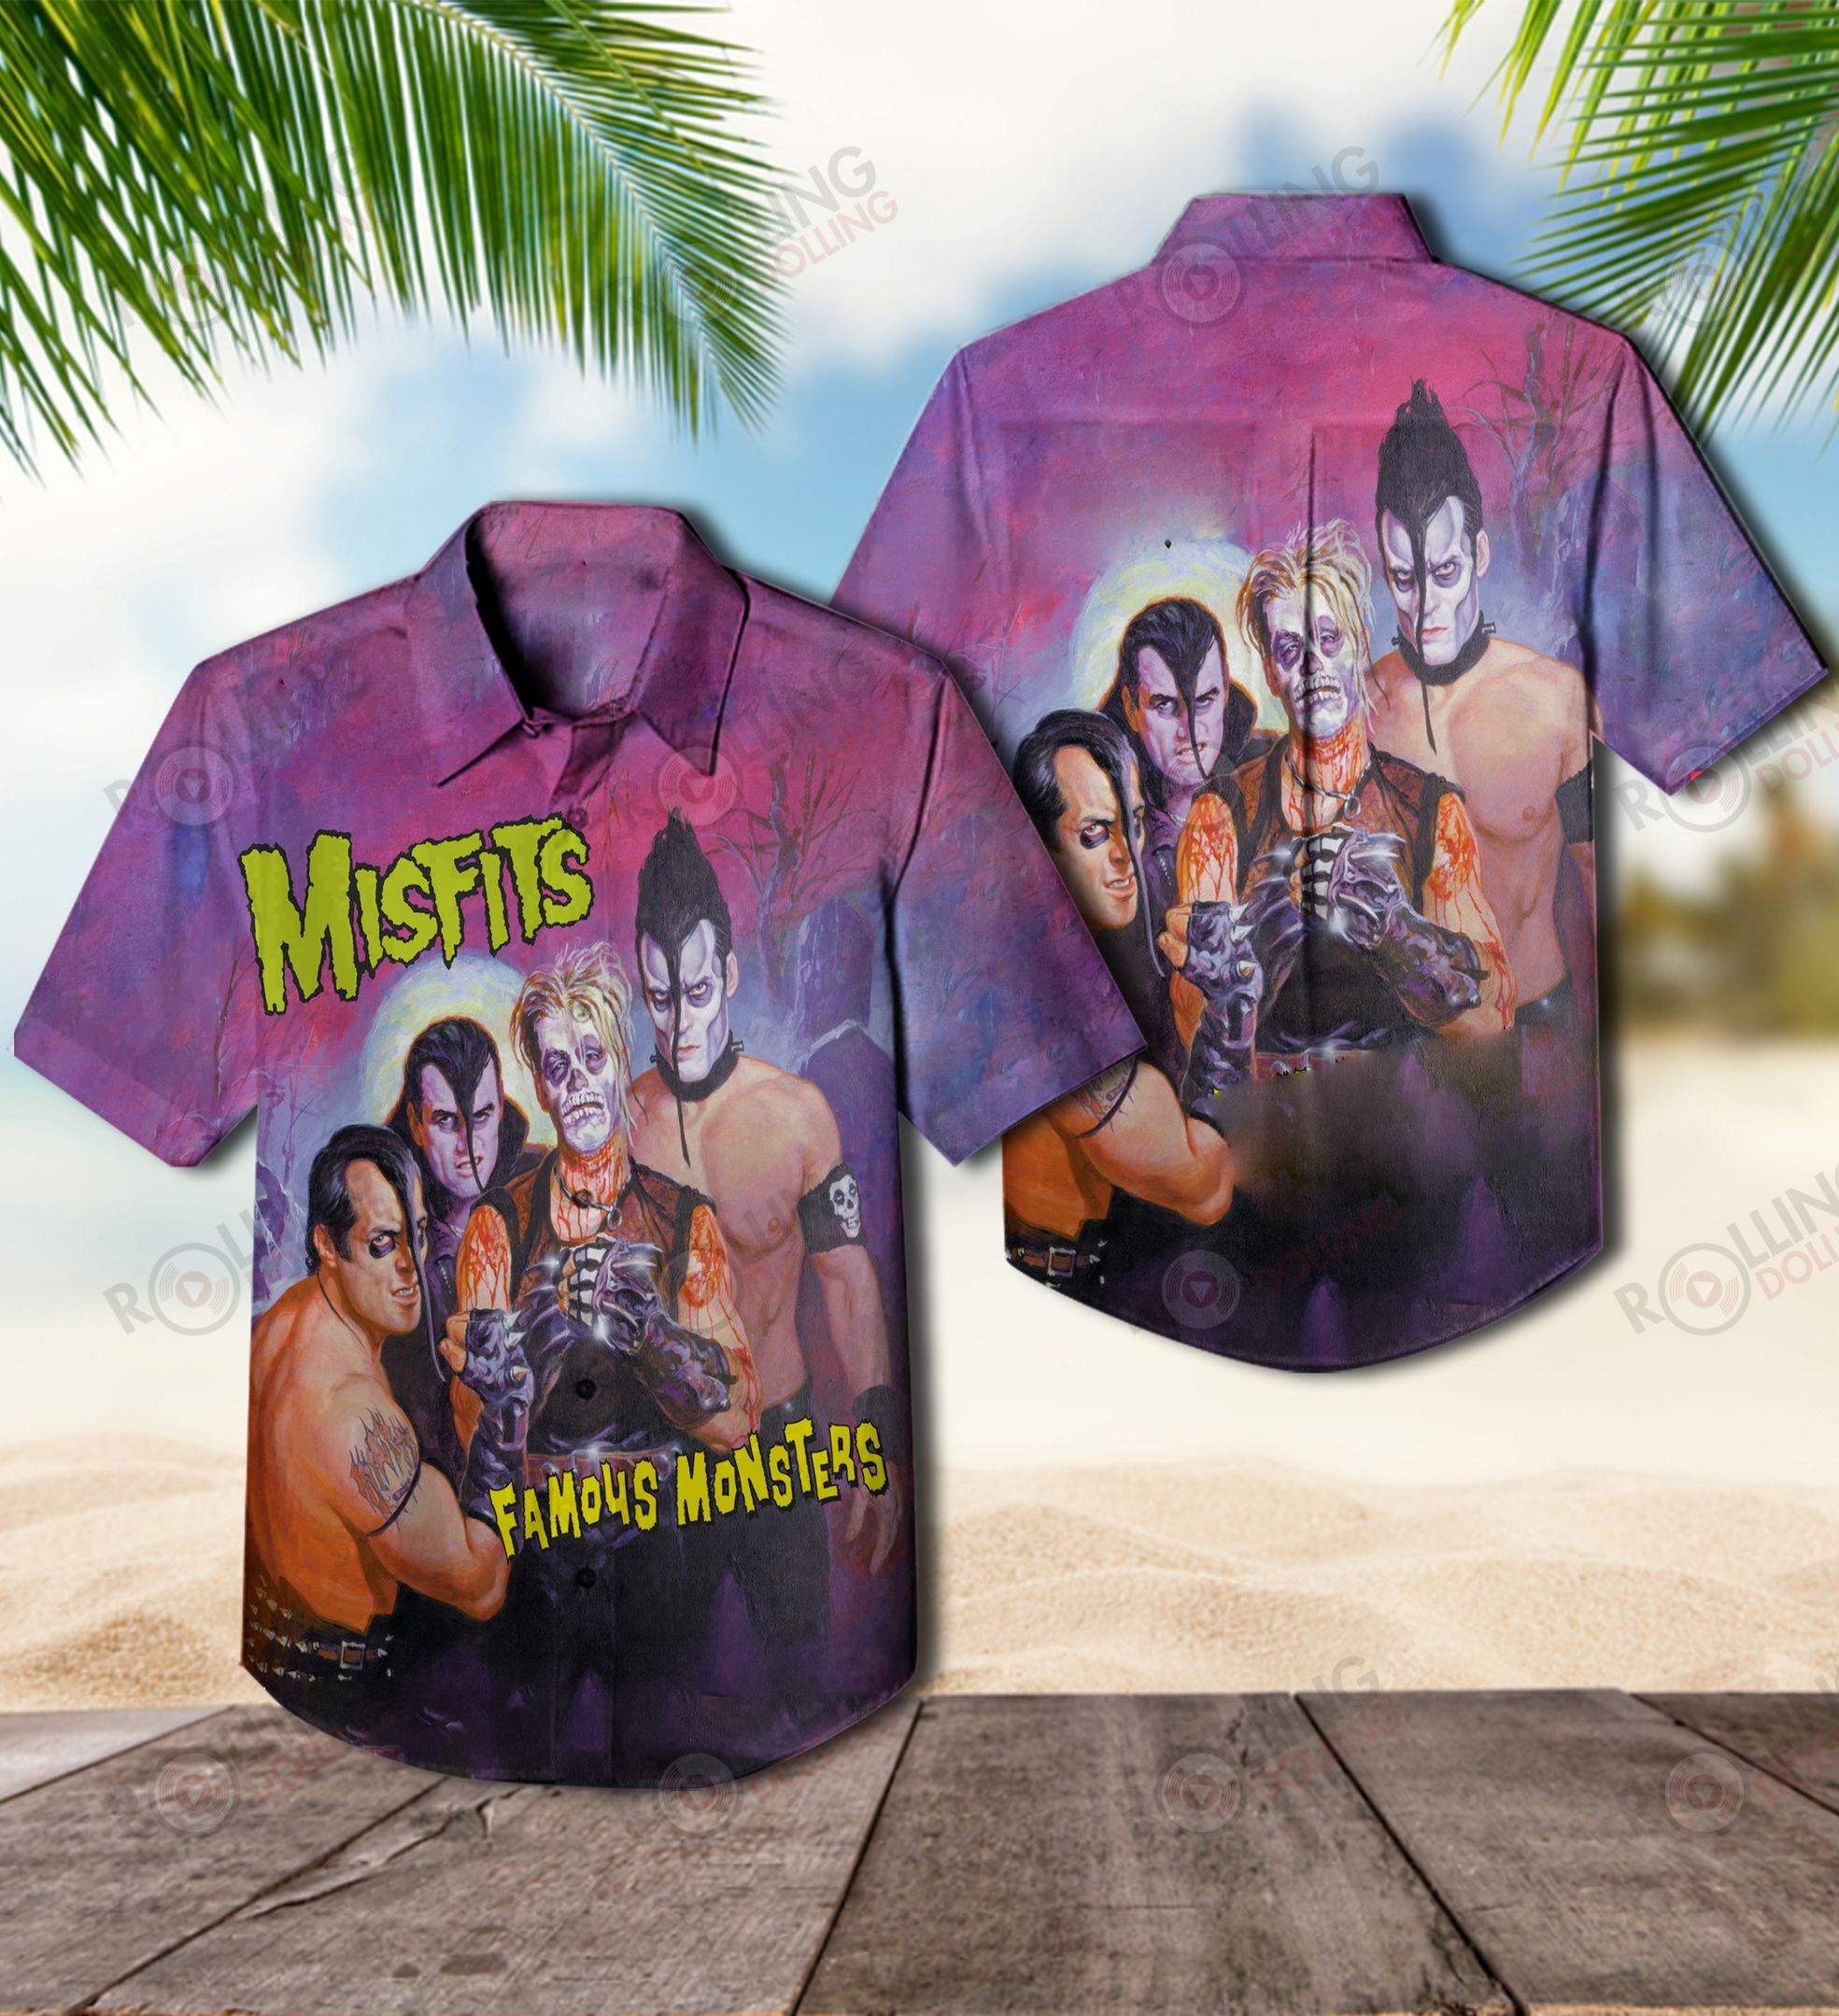 This would make a great gift for any fan who loves Hawaiian Shirt as well as Rock band 18